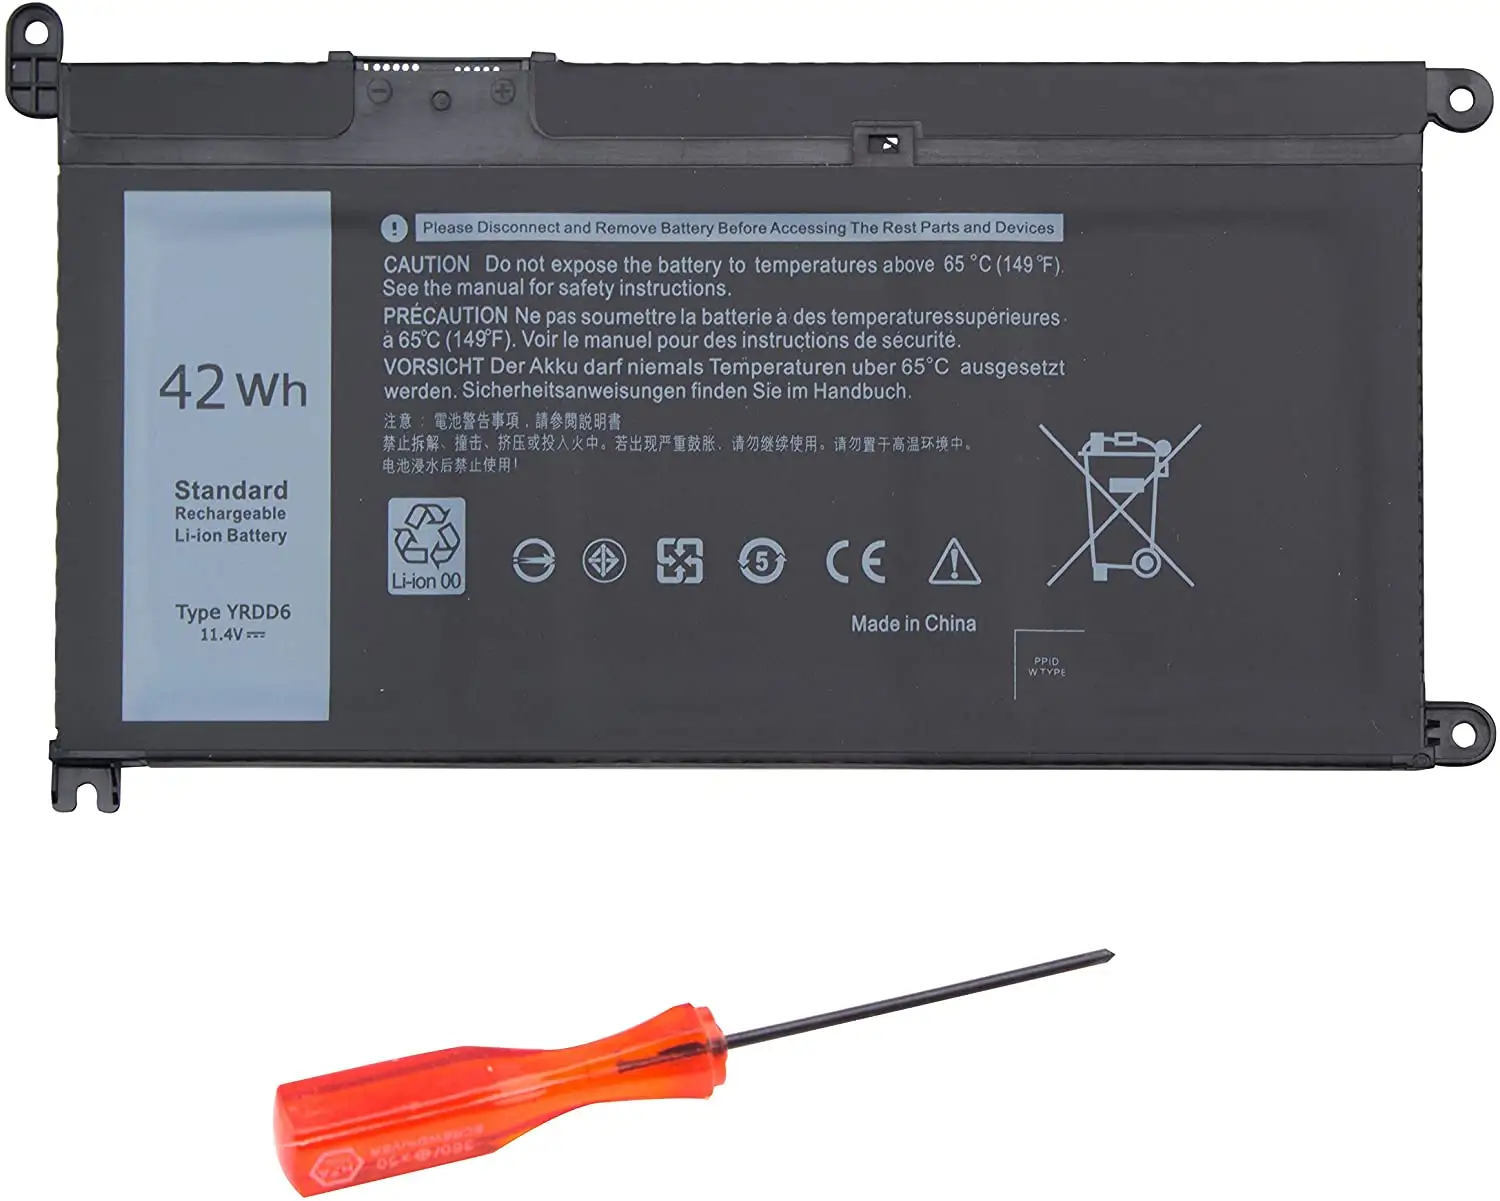 YRDD6 VM732 11.4V 42Wh 11.4V Replacement Laptop Battery for Dell Inspiron 3493 3582 3593 3793 7586 Series Lithium Ion Batteries